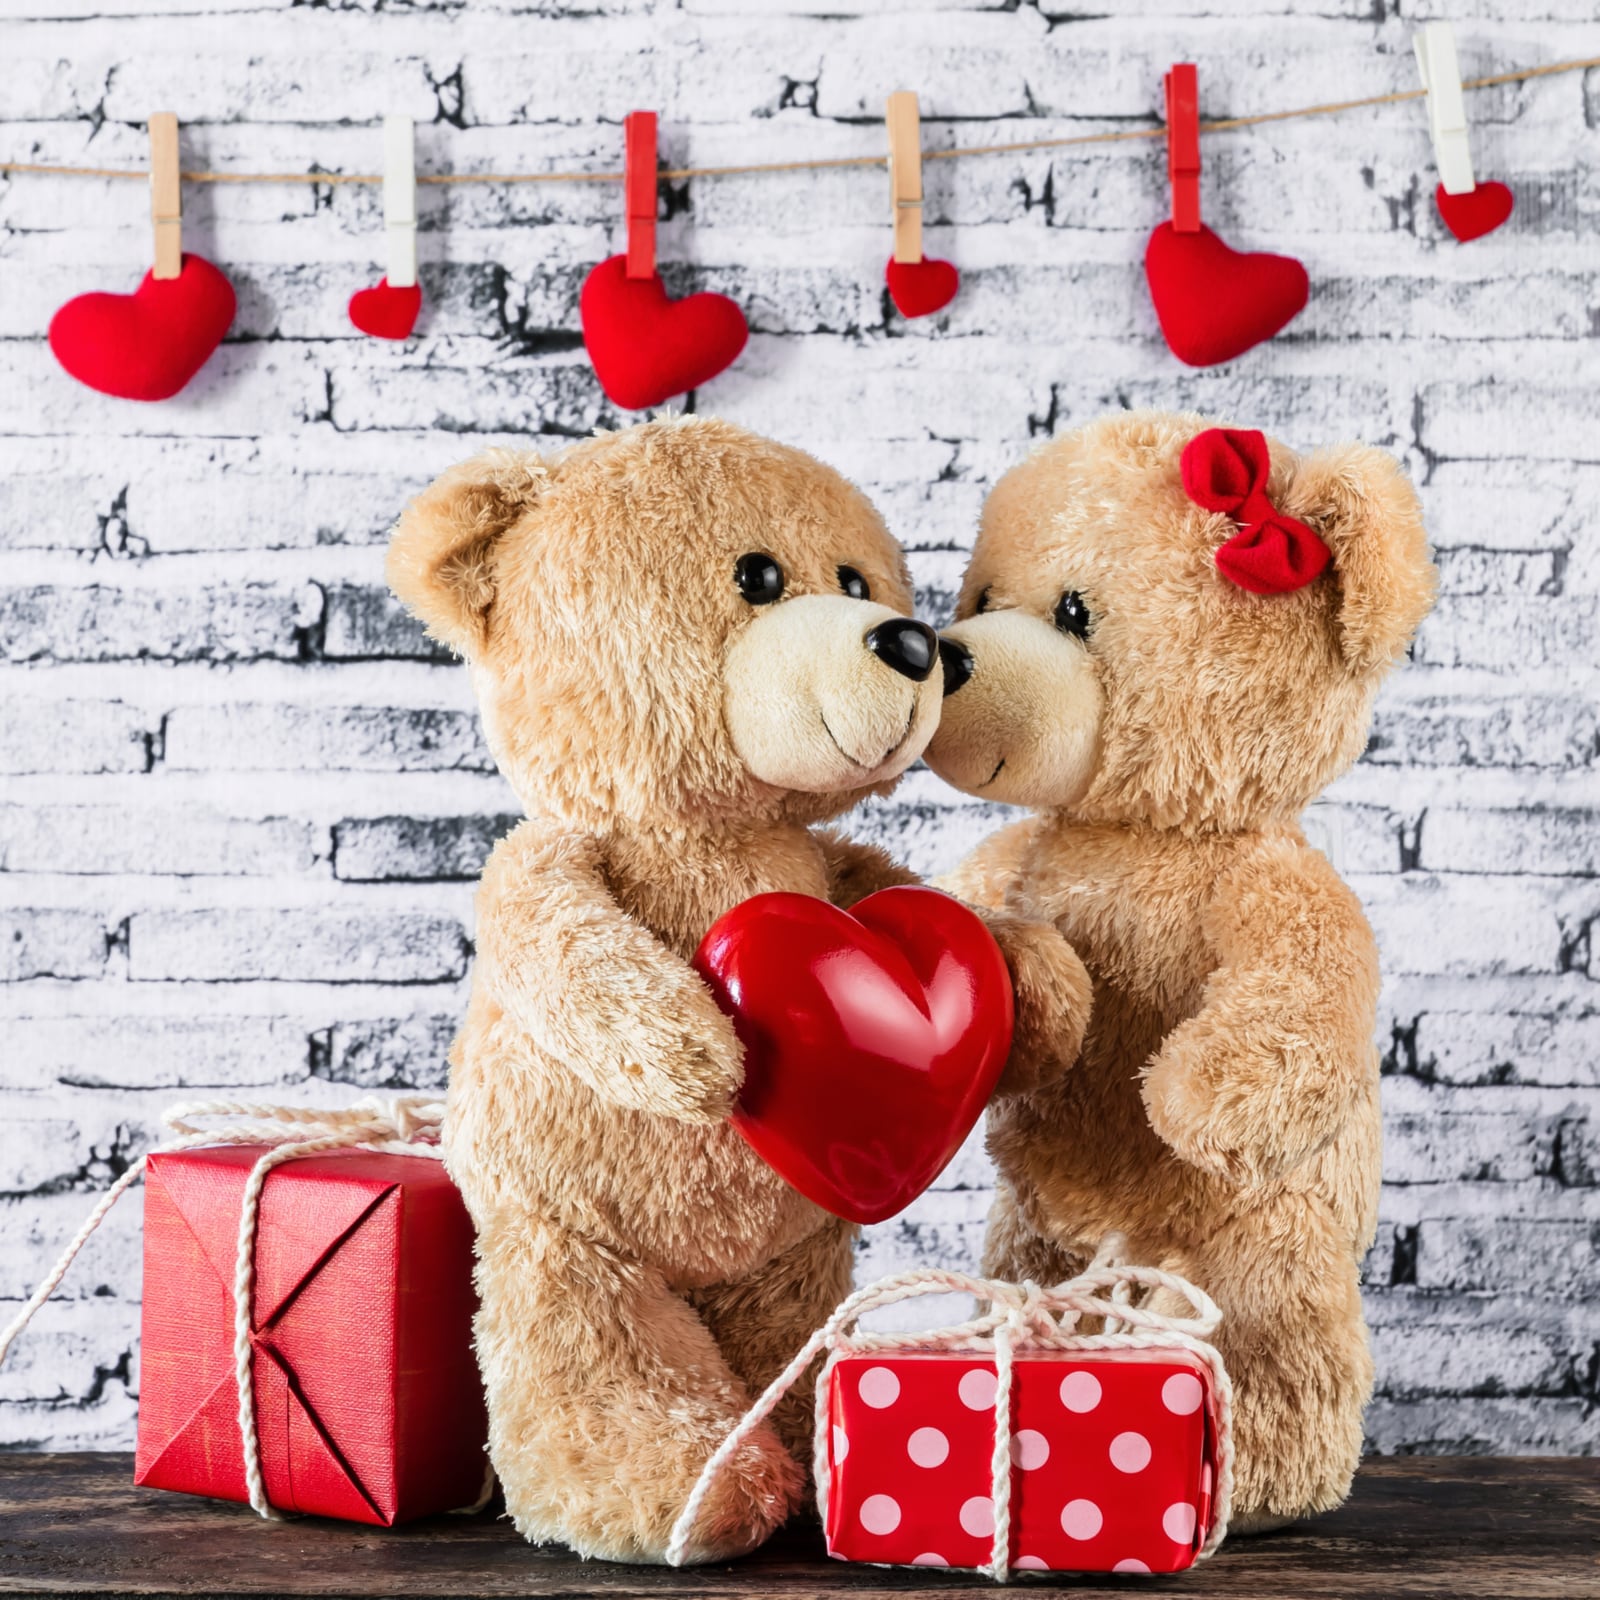 Happy Teddy Day 2023: Wishes, Images, Quotes, Messages And Whatsapp  Greetings To Share With Your Partner